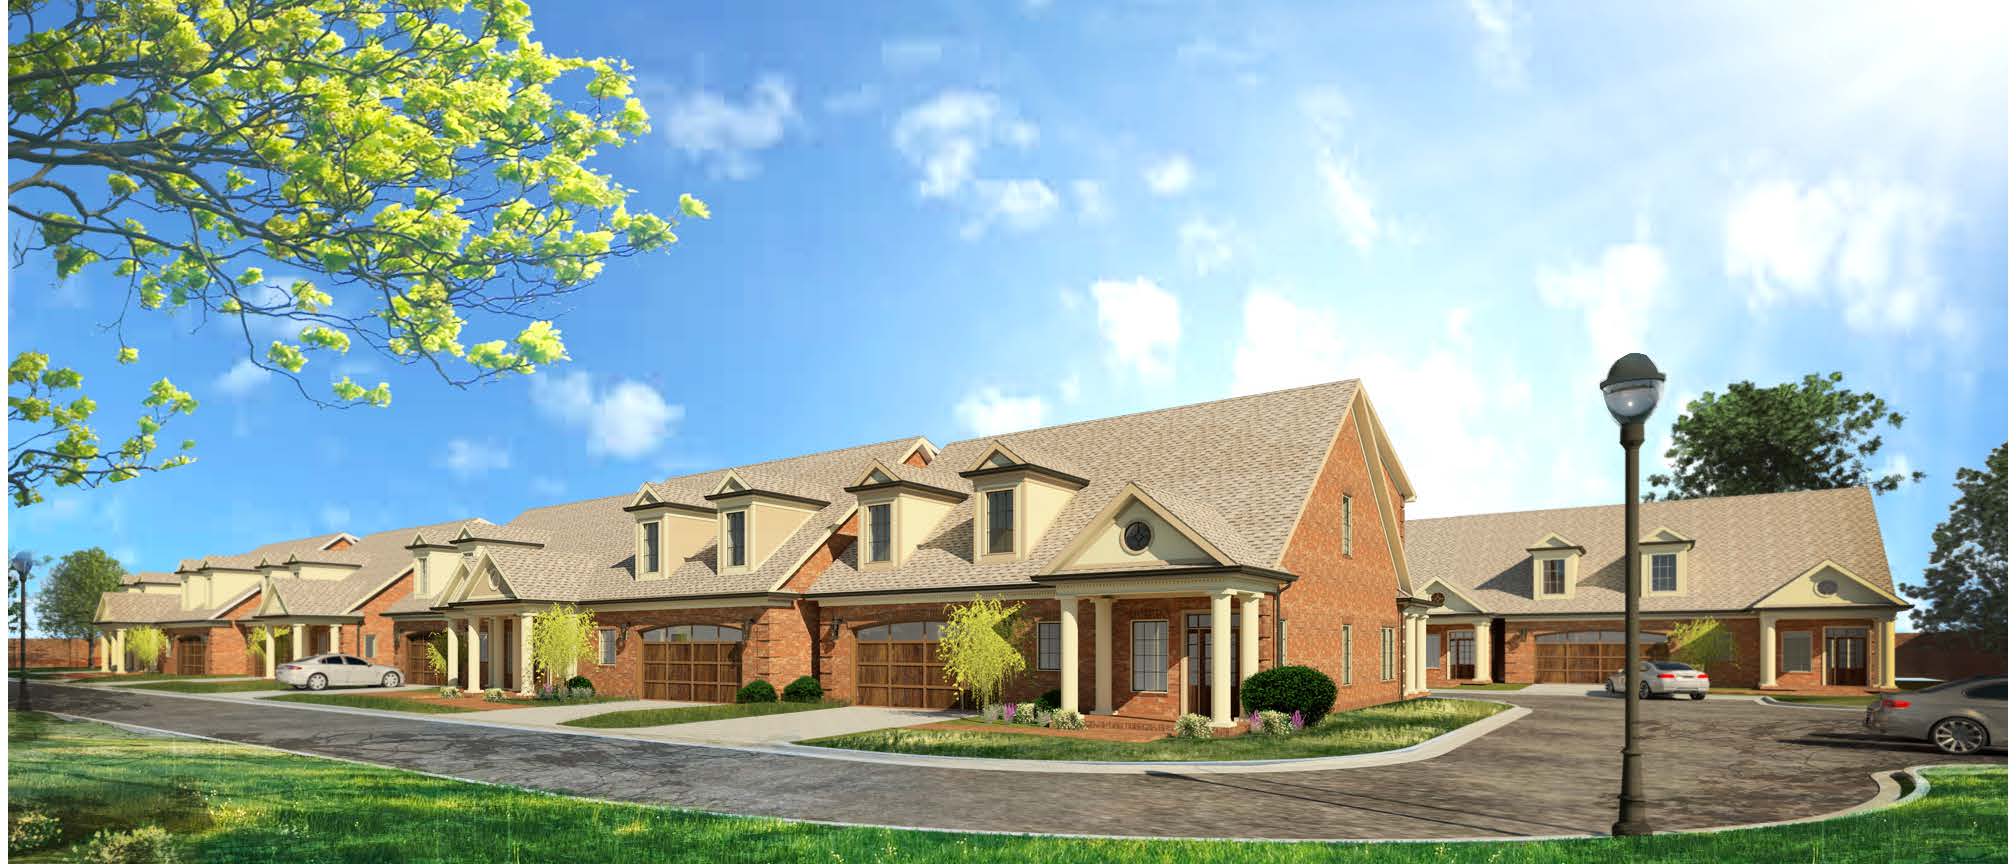 Multiple Family Residential Architecture Project, Lexington, Kentucky